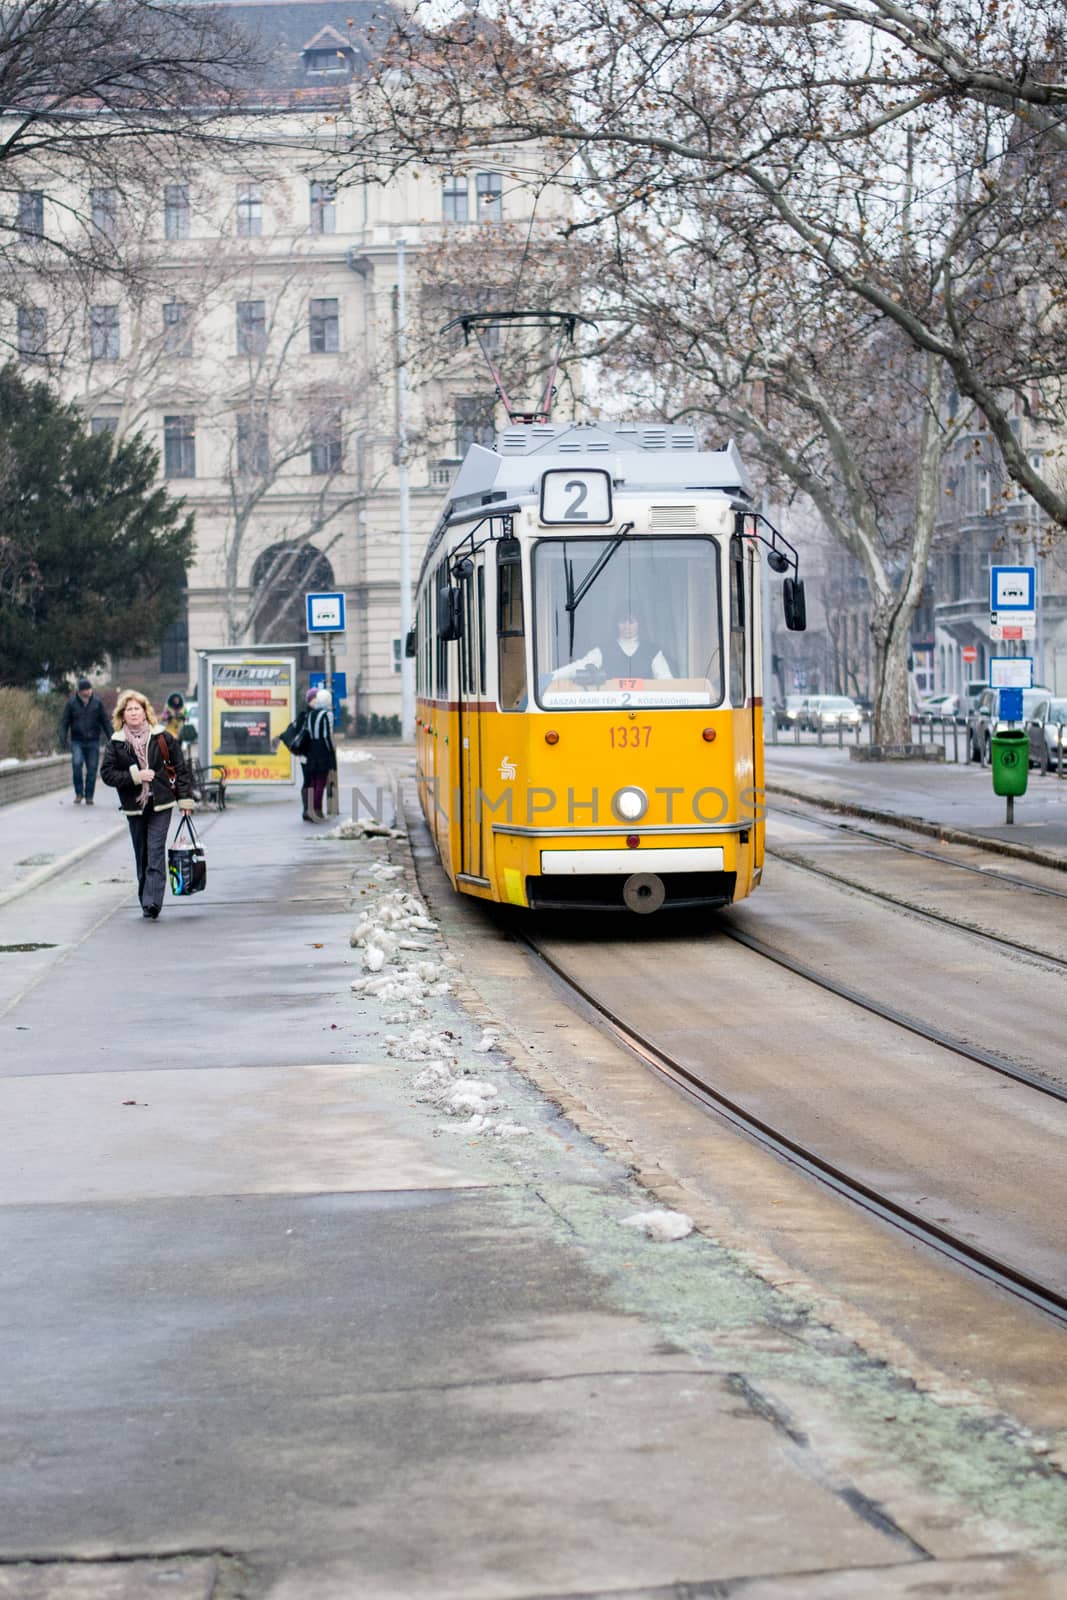 Budapest, Hungary, February 2013: Old tram navigating through the city by kb79